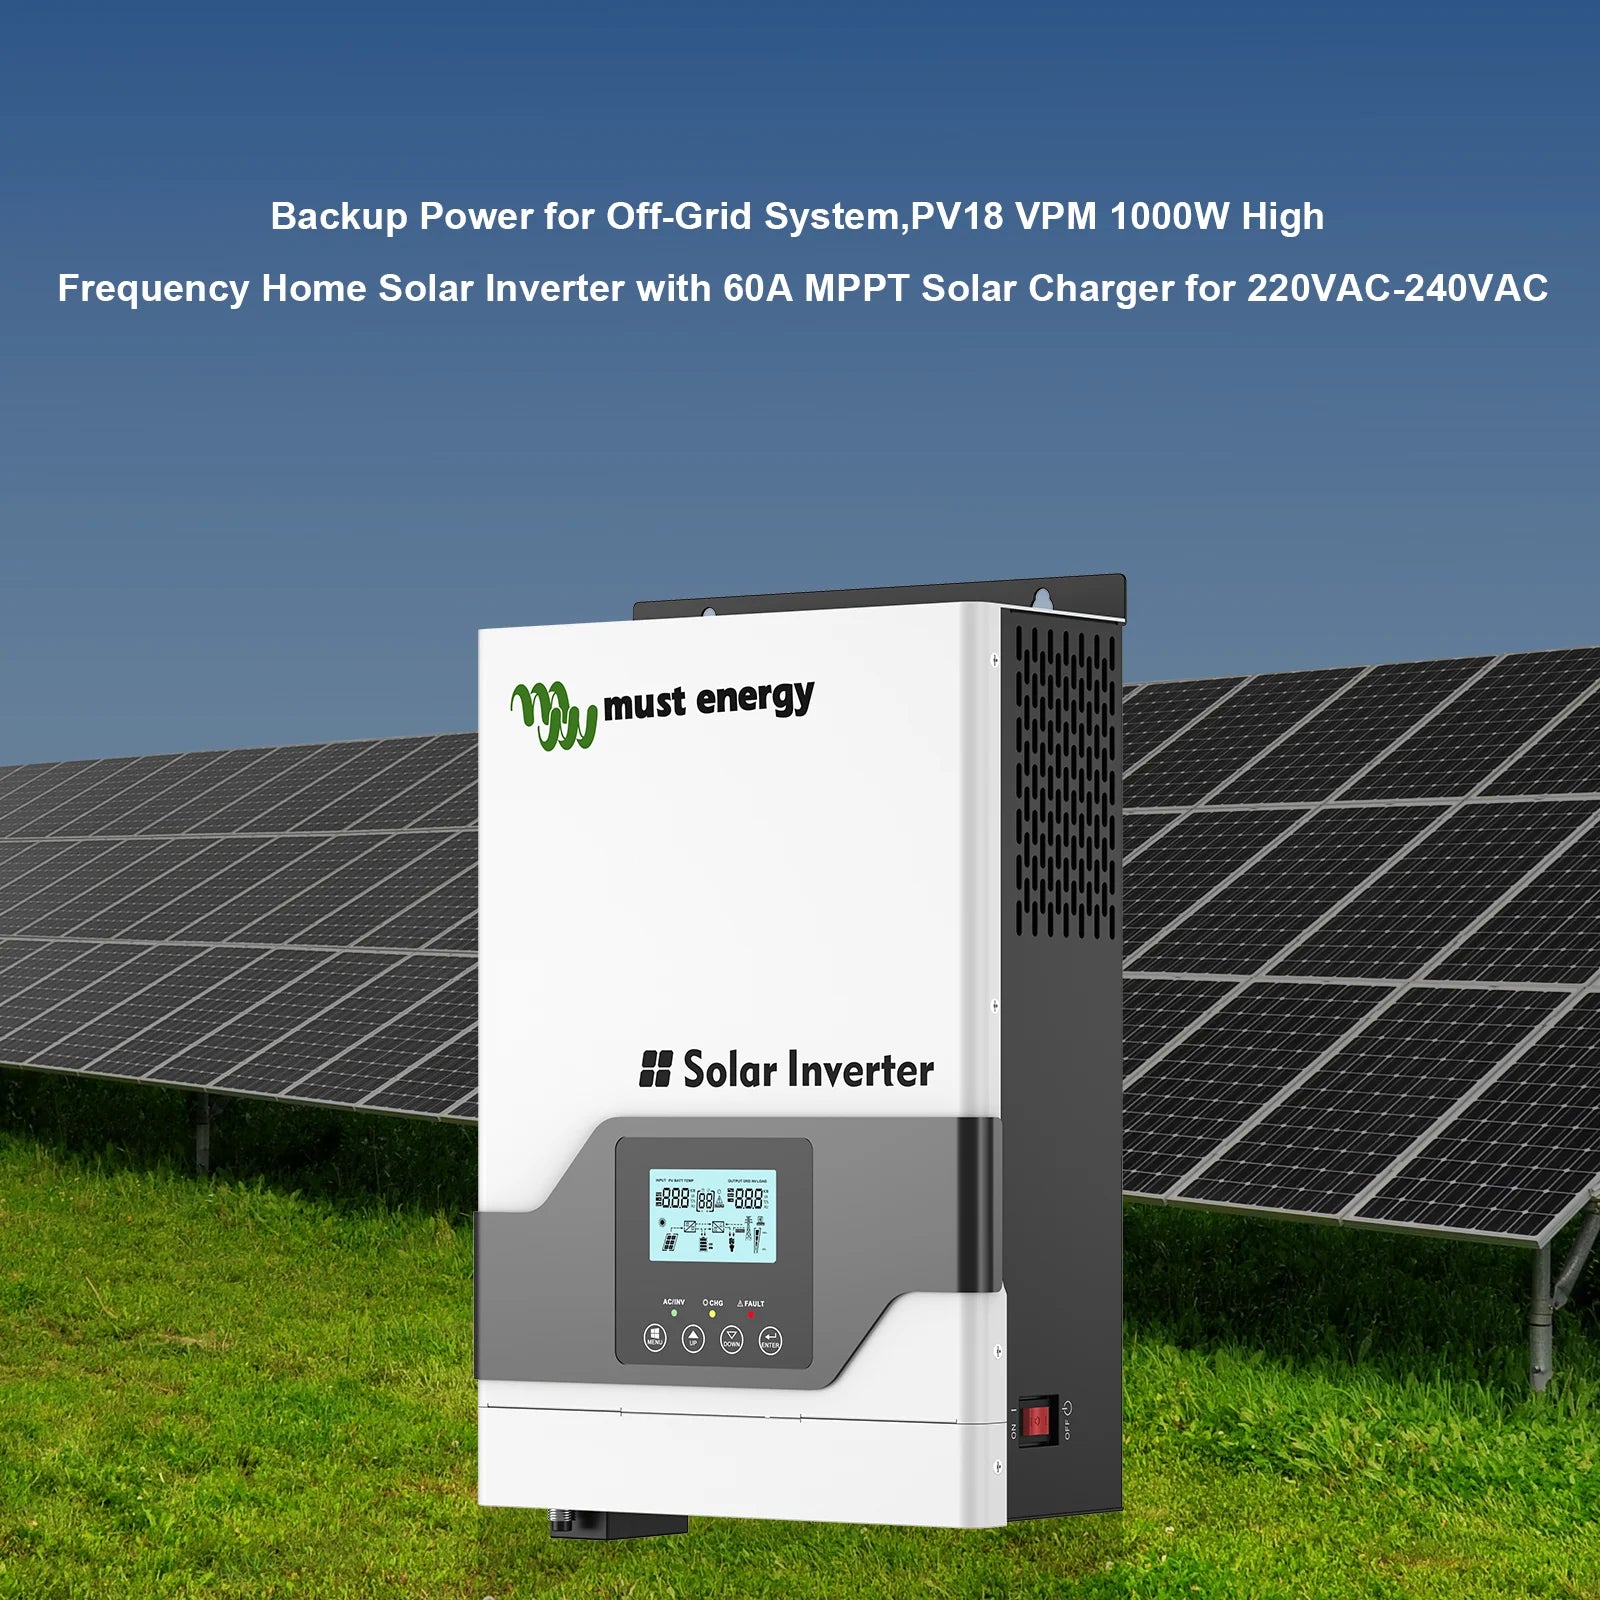 Hybrid solar inverter for off-grid systems with backup power and compatibility with various load types.